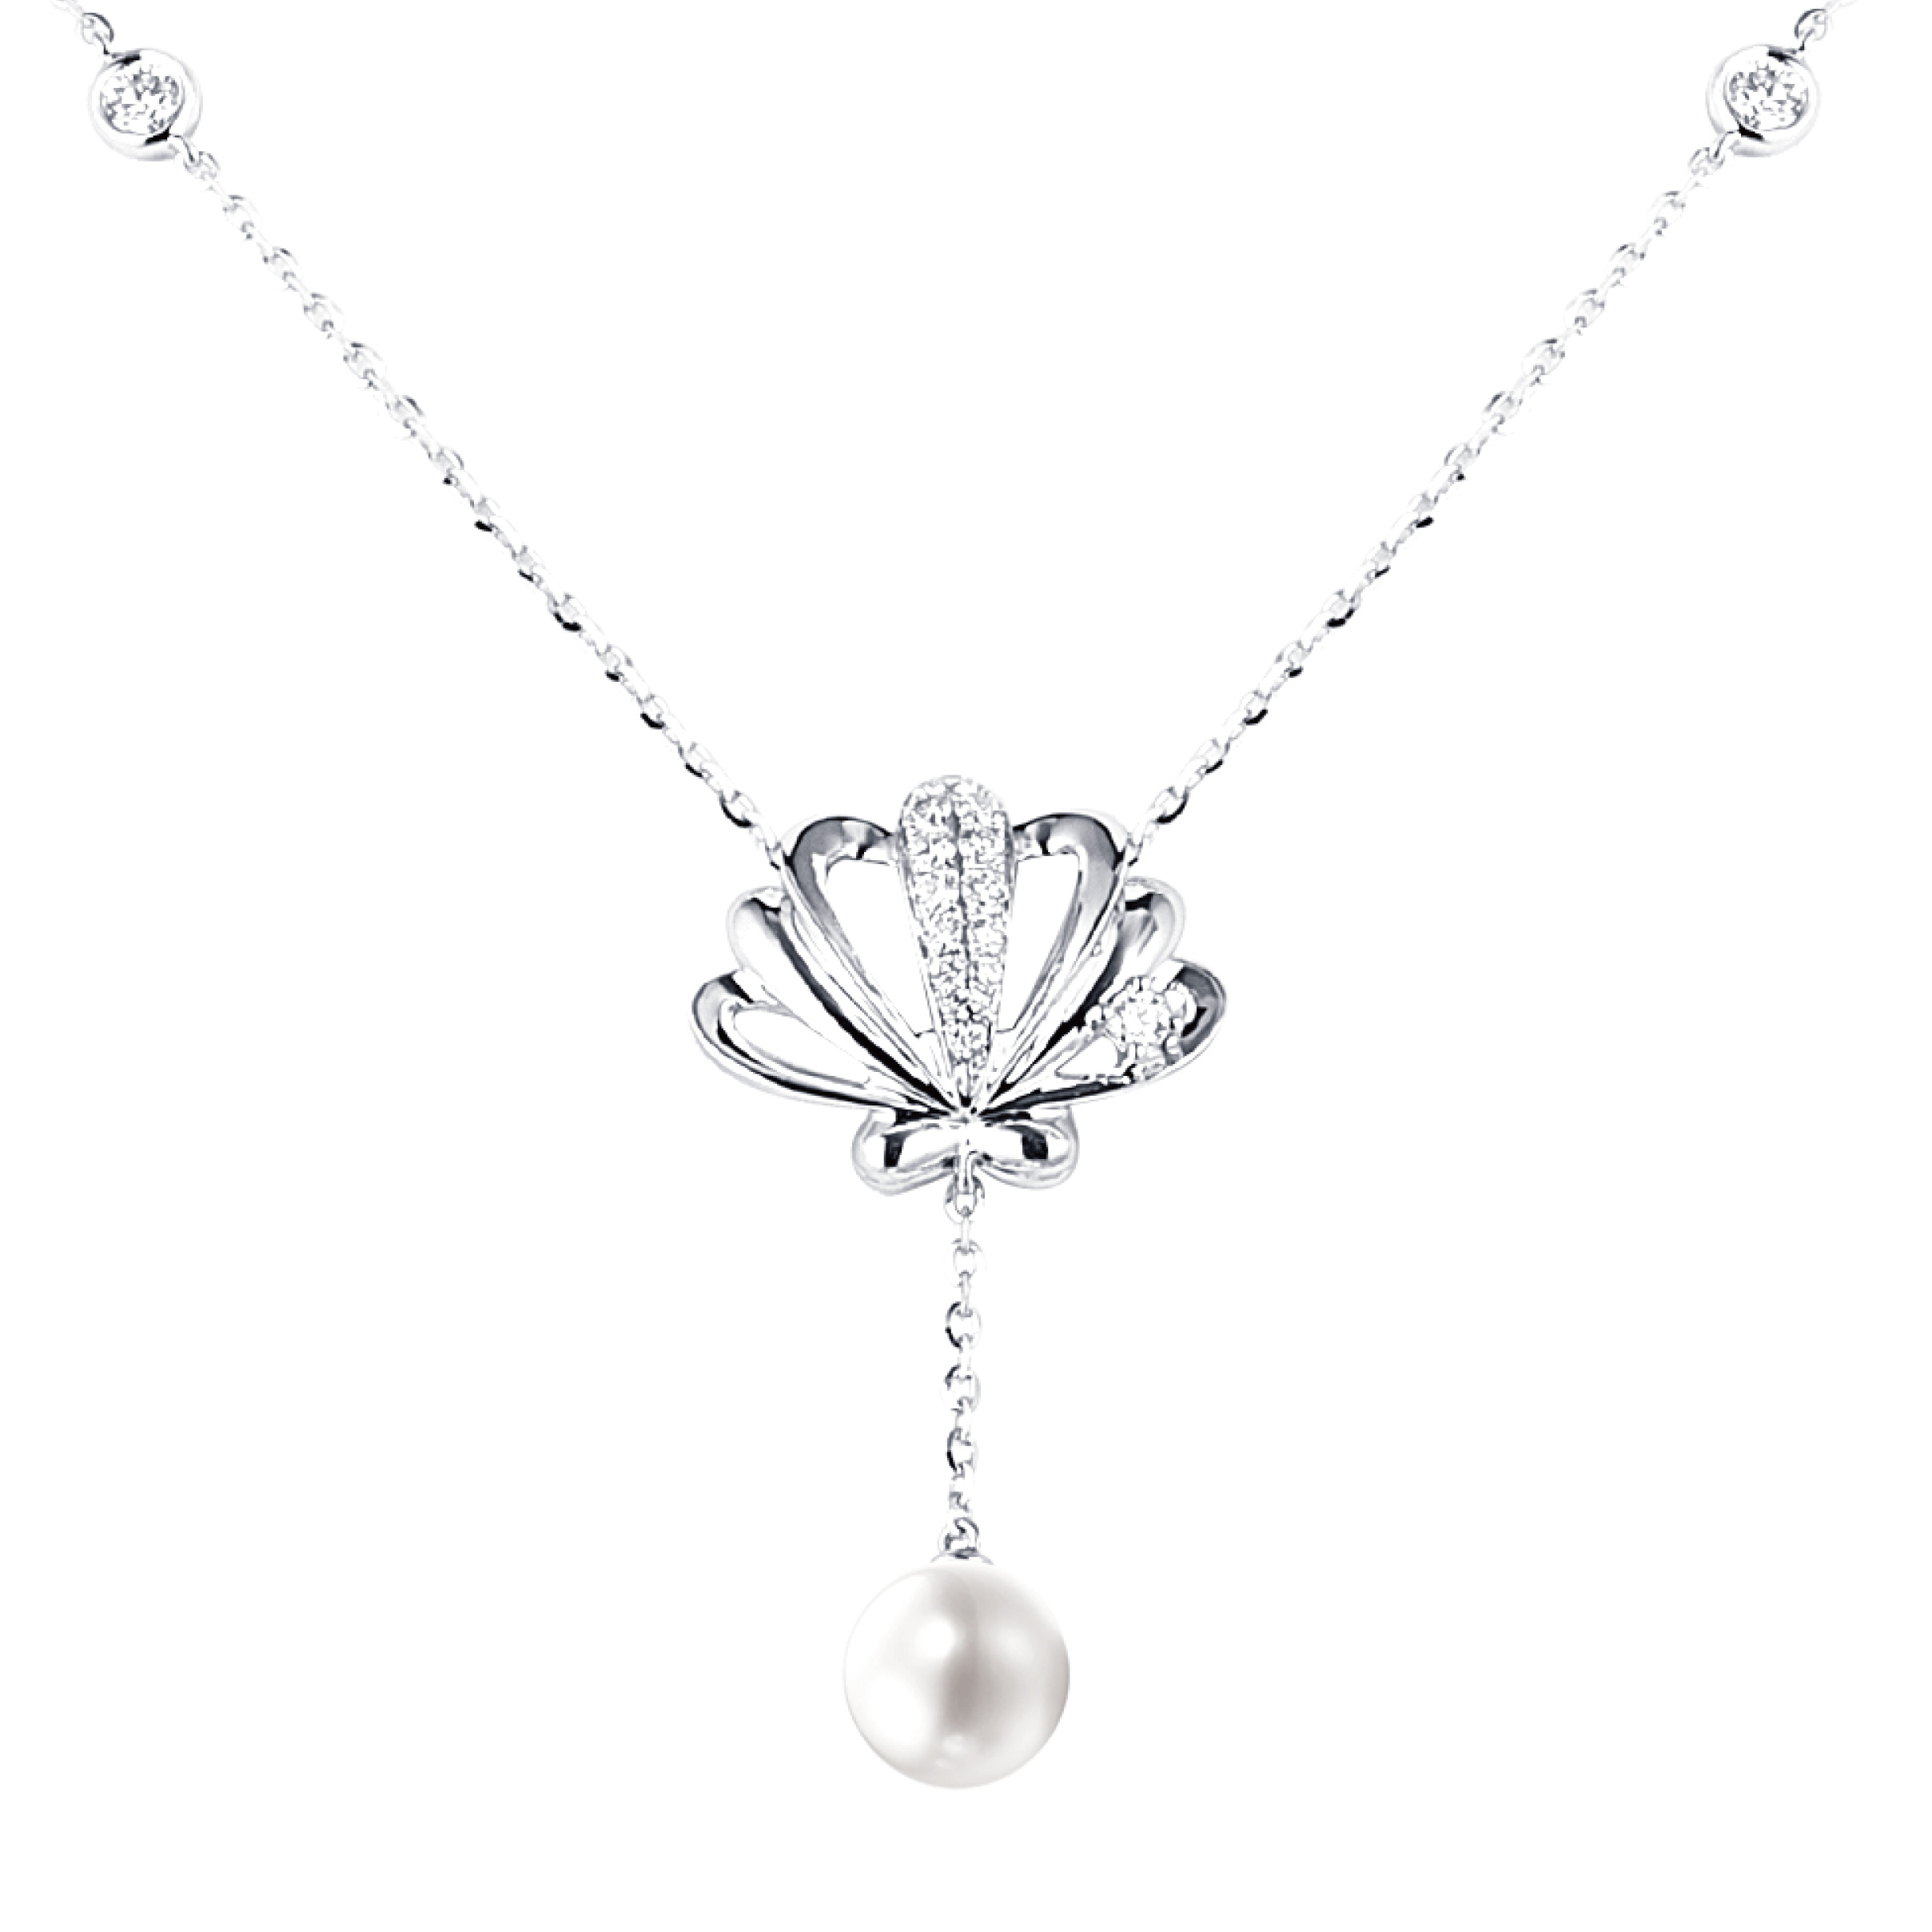 Dear Q "Seashell" 18K White Gold Diamond Necklace with Pearl